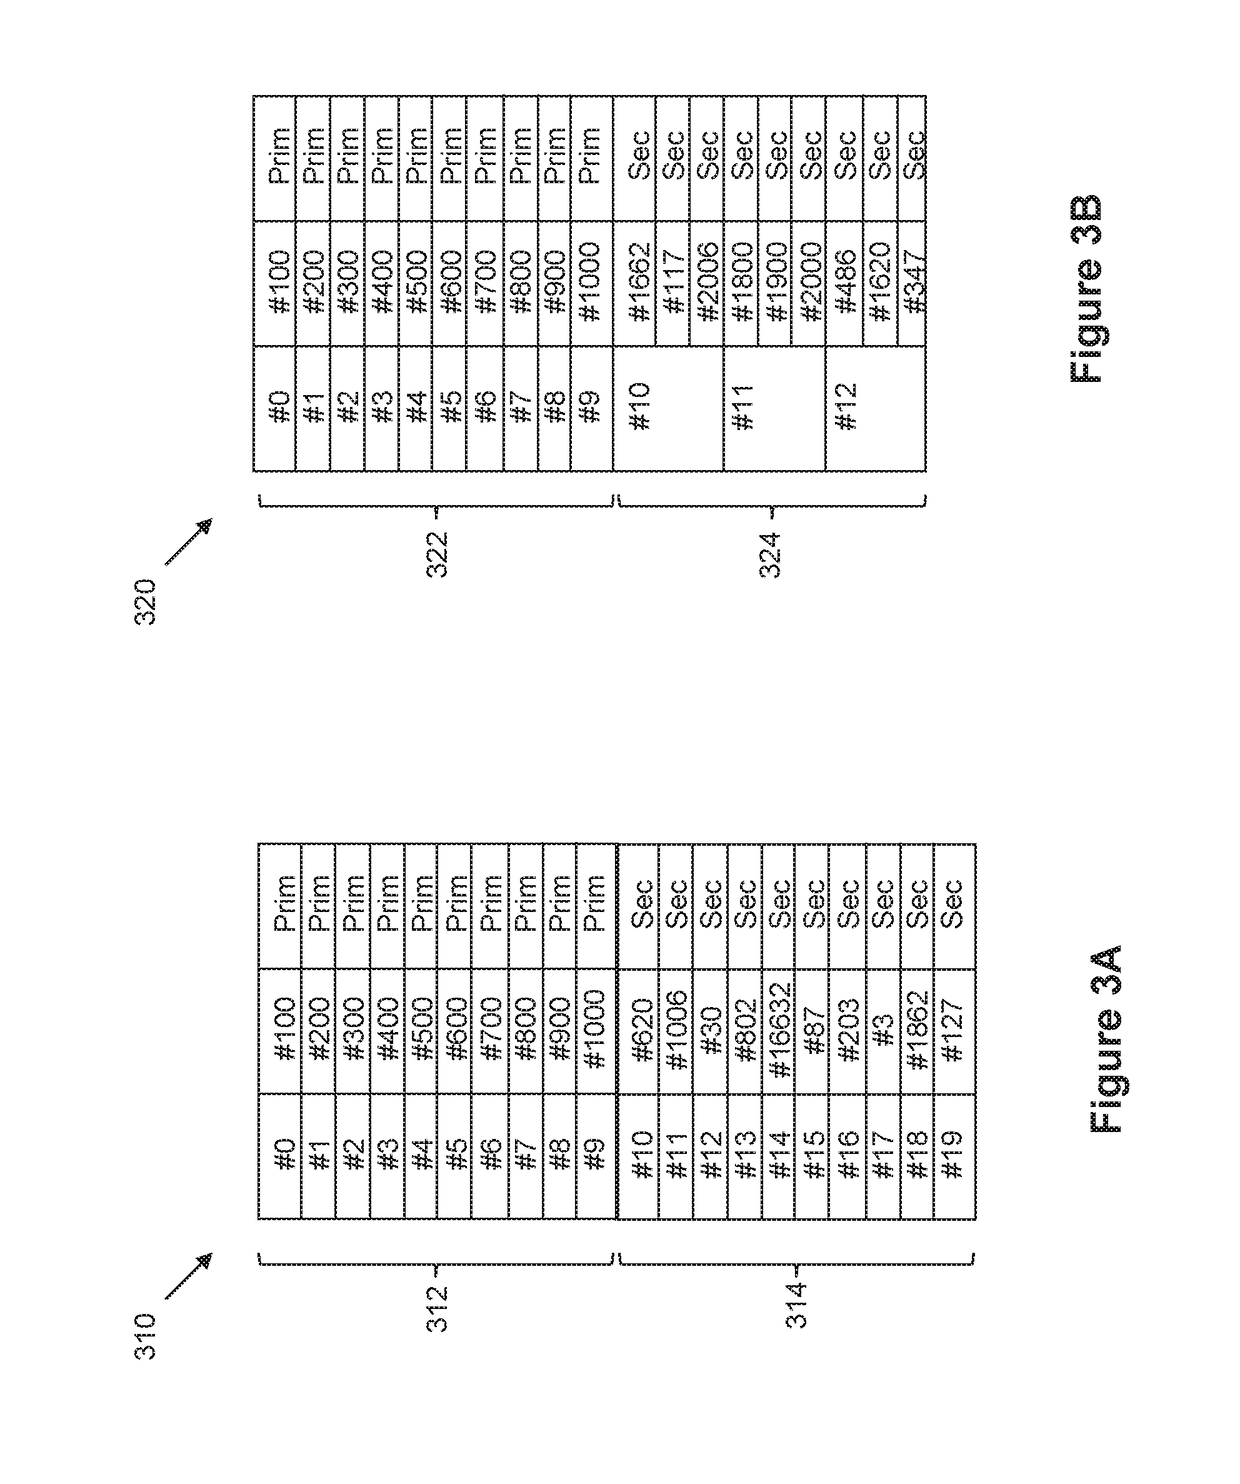 Embedded resilient distributed dataset systems and methods